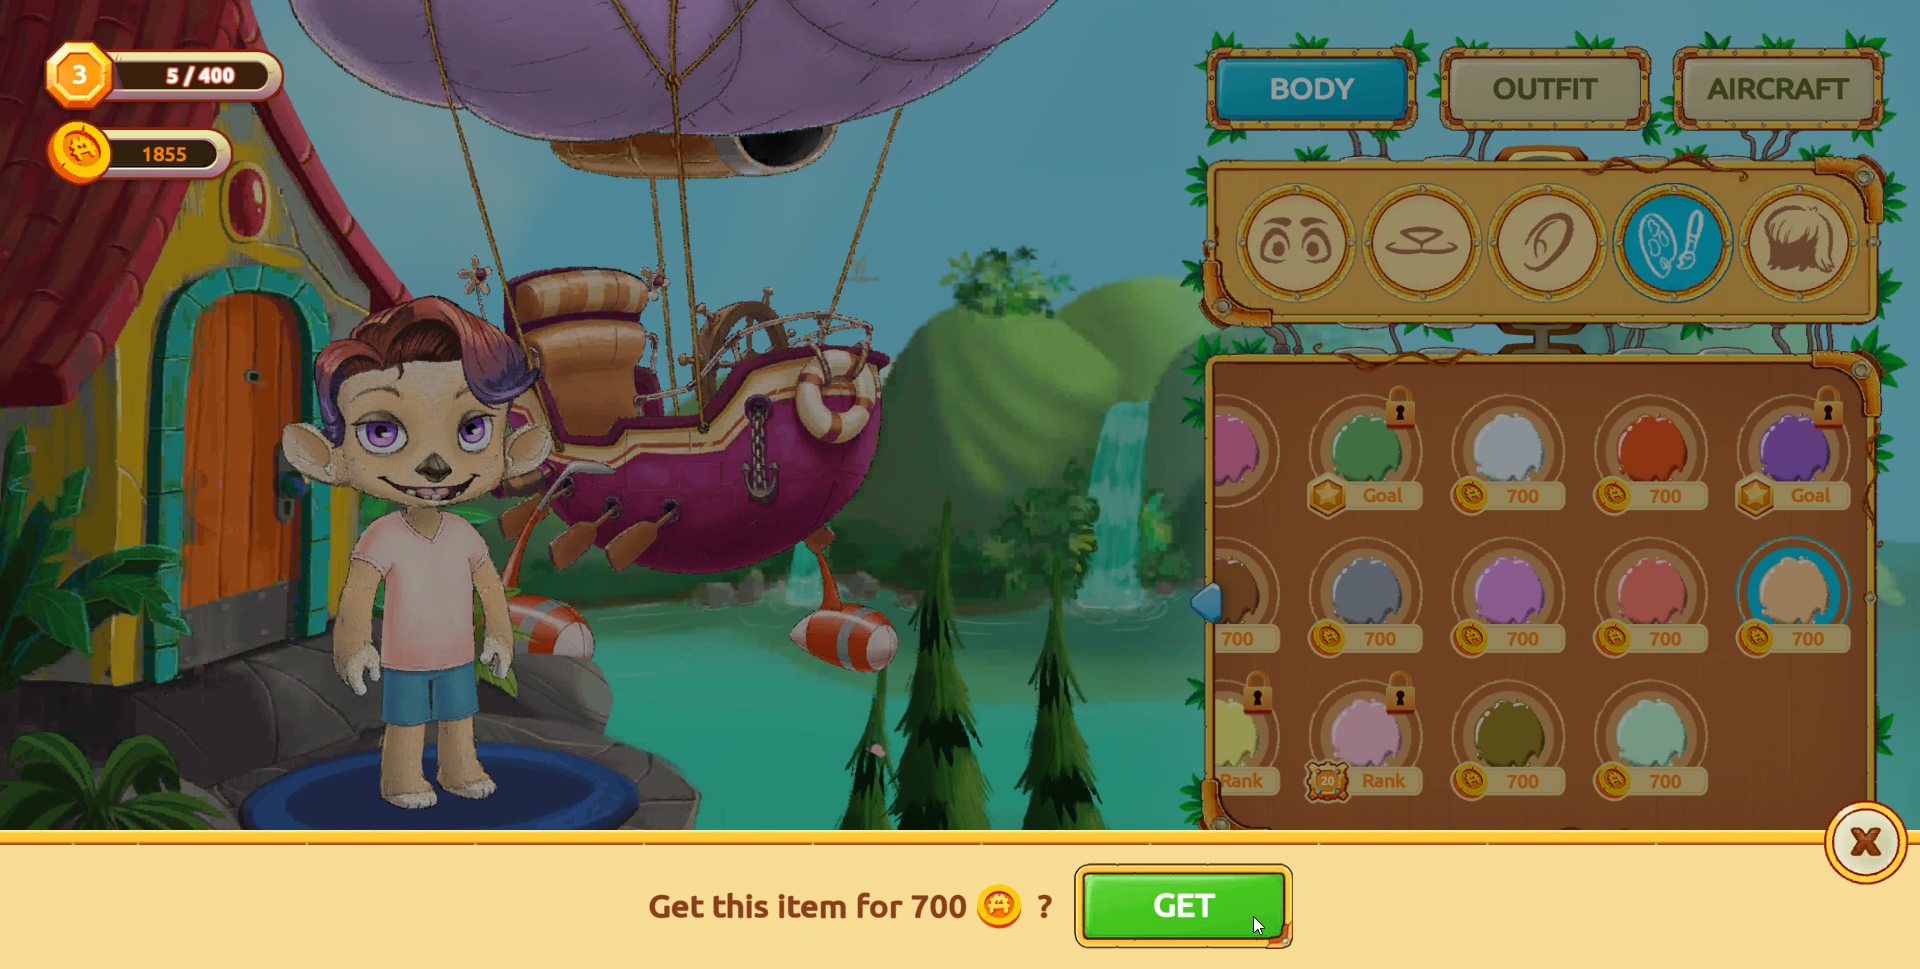 Items can be purchased using coins